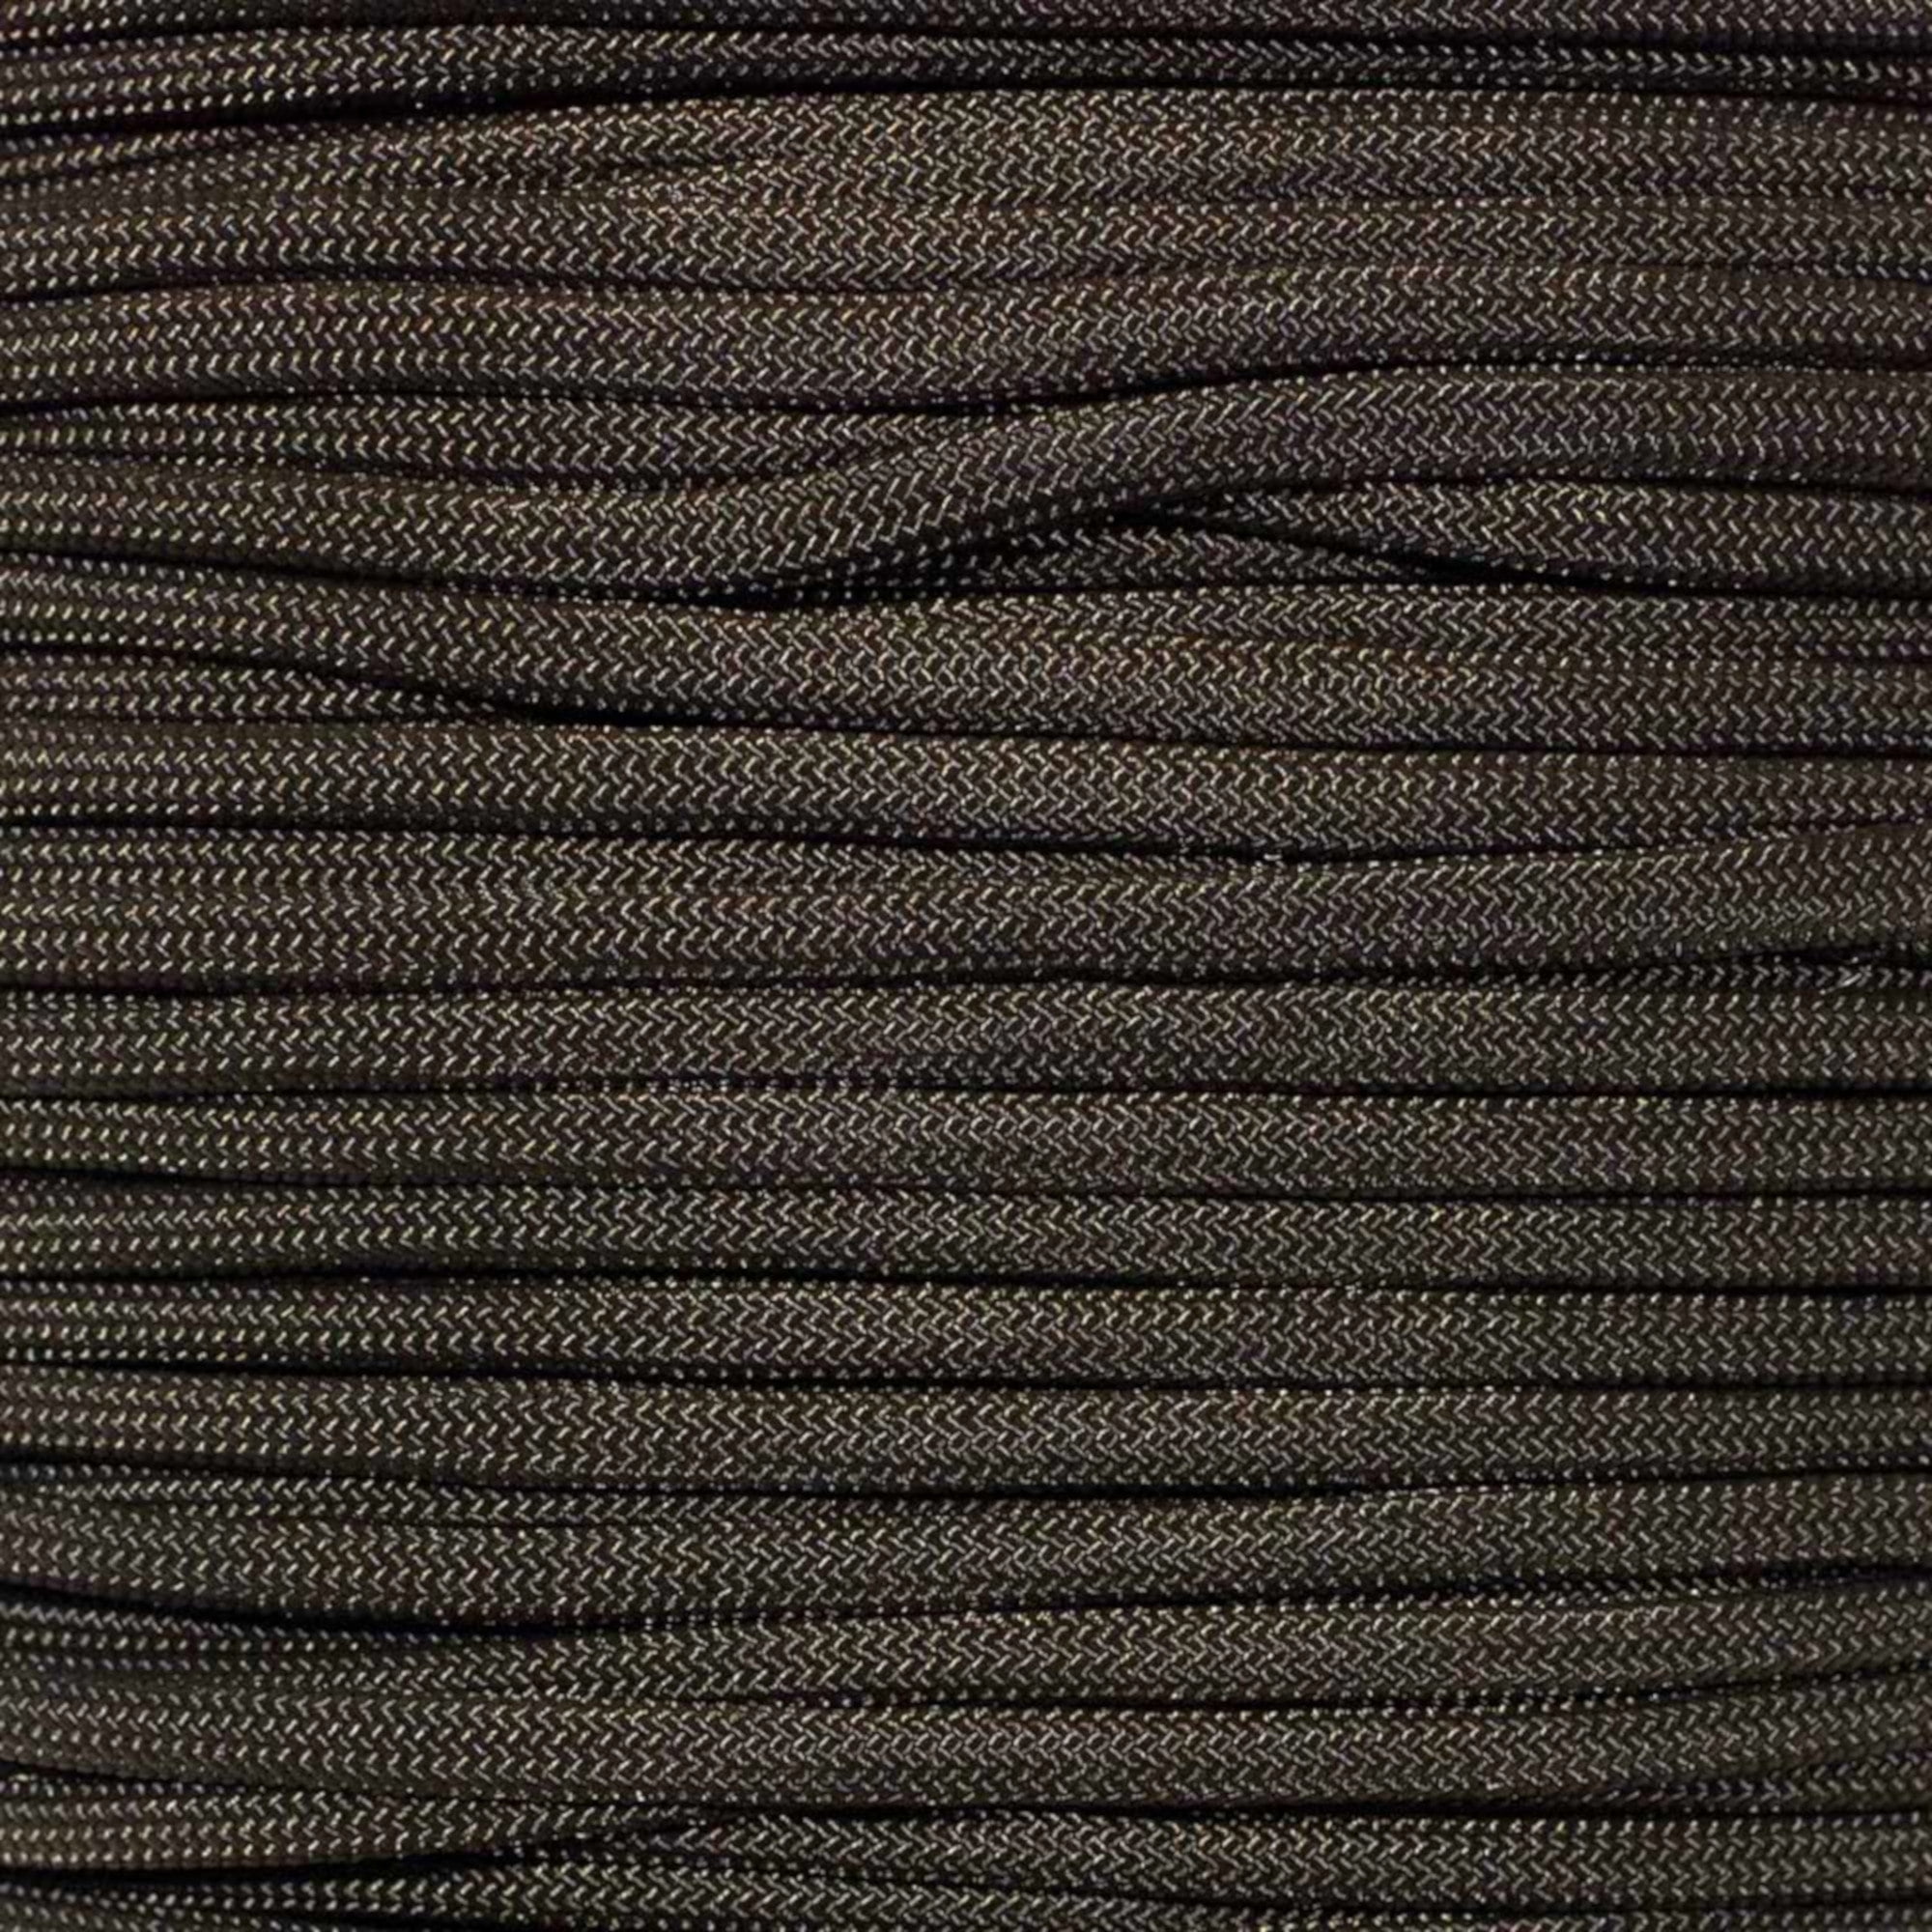  Paracord Planet Type III 550 Paracord – 600+ Colors – Hanks  from 10-100 Ft and Spools from 250-1000 Ft - Perfect for Indoor, Outdoor, &  DIY Projects : Sports & Outdoors